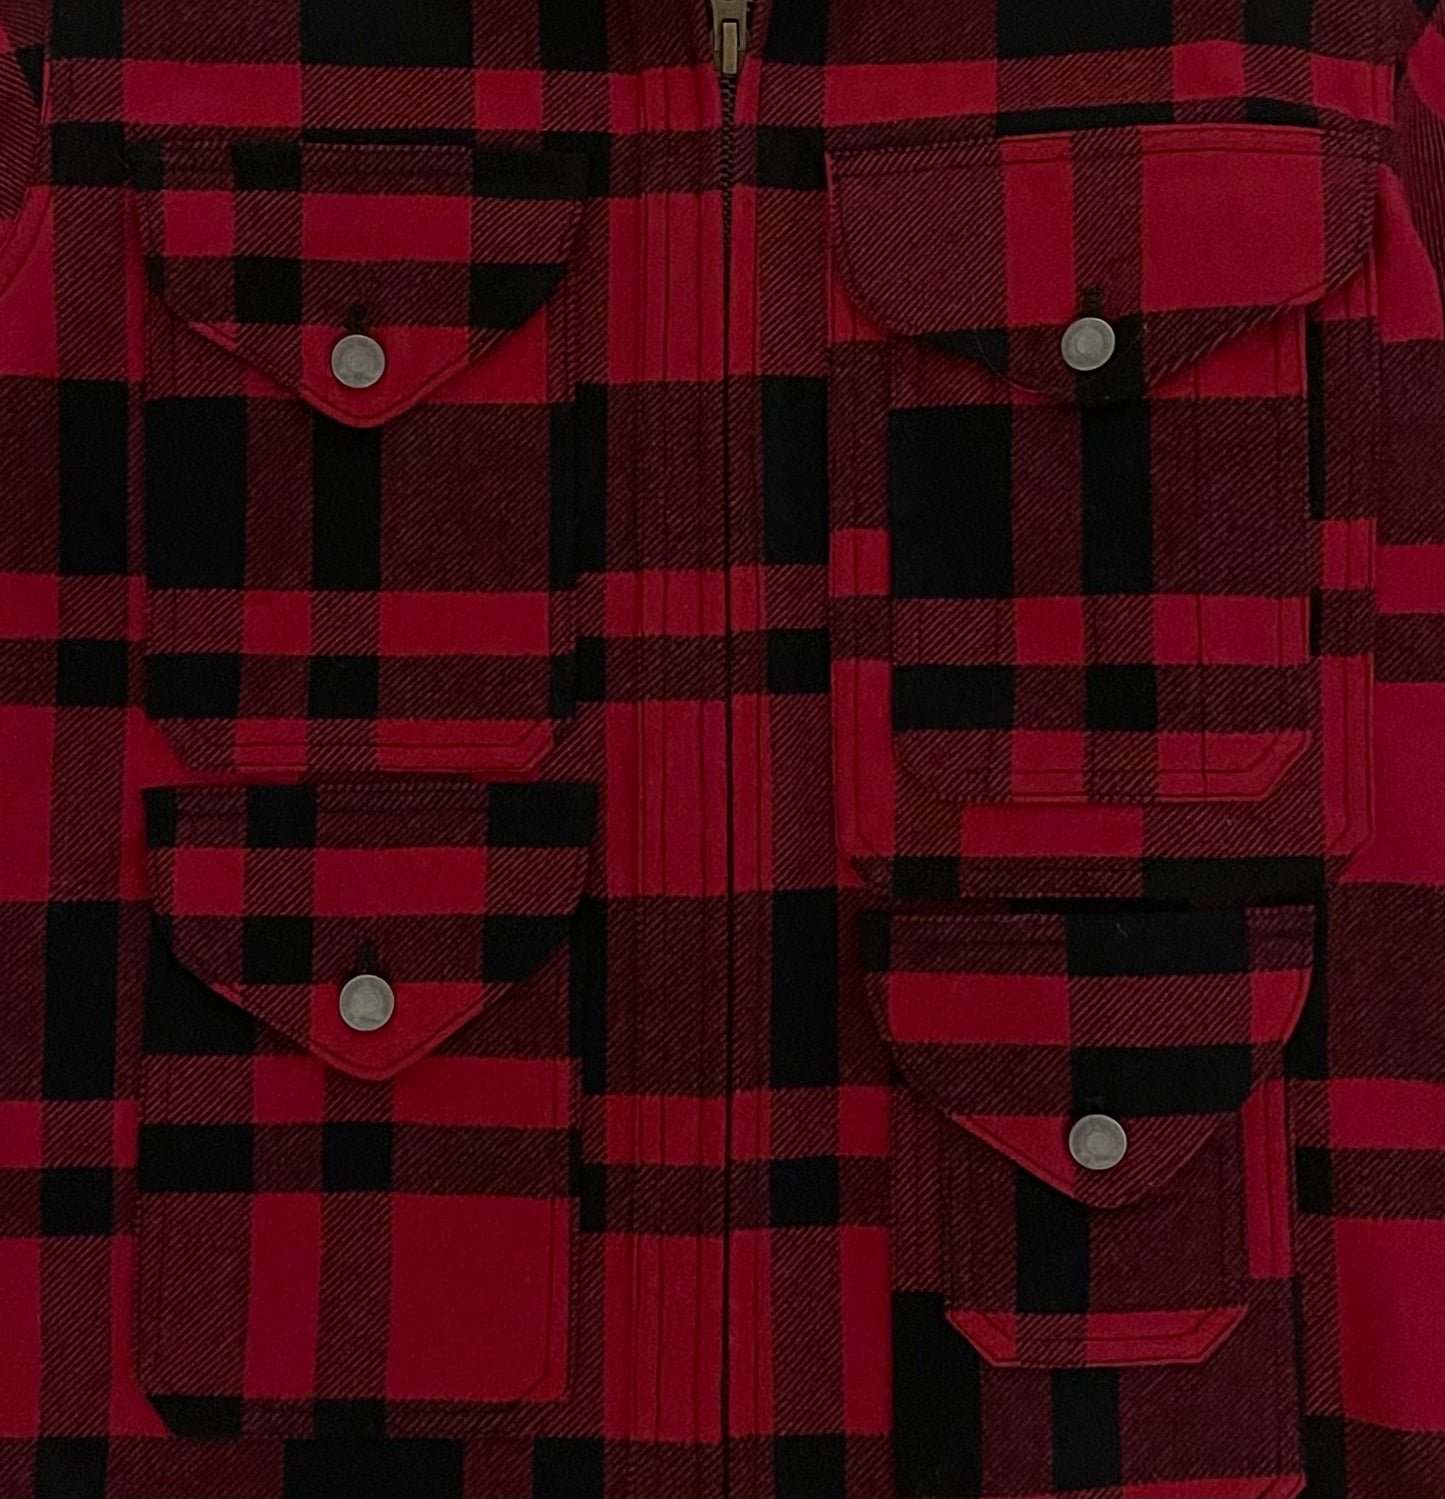 AW2003 General Research Plaid 6 Pocket Jacket